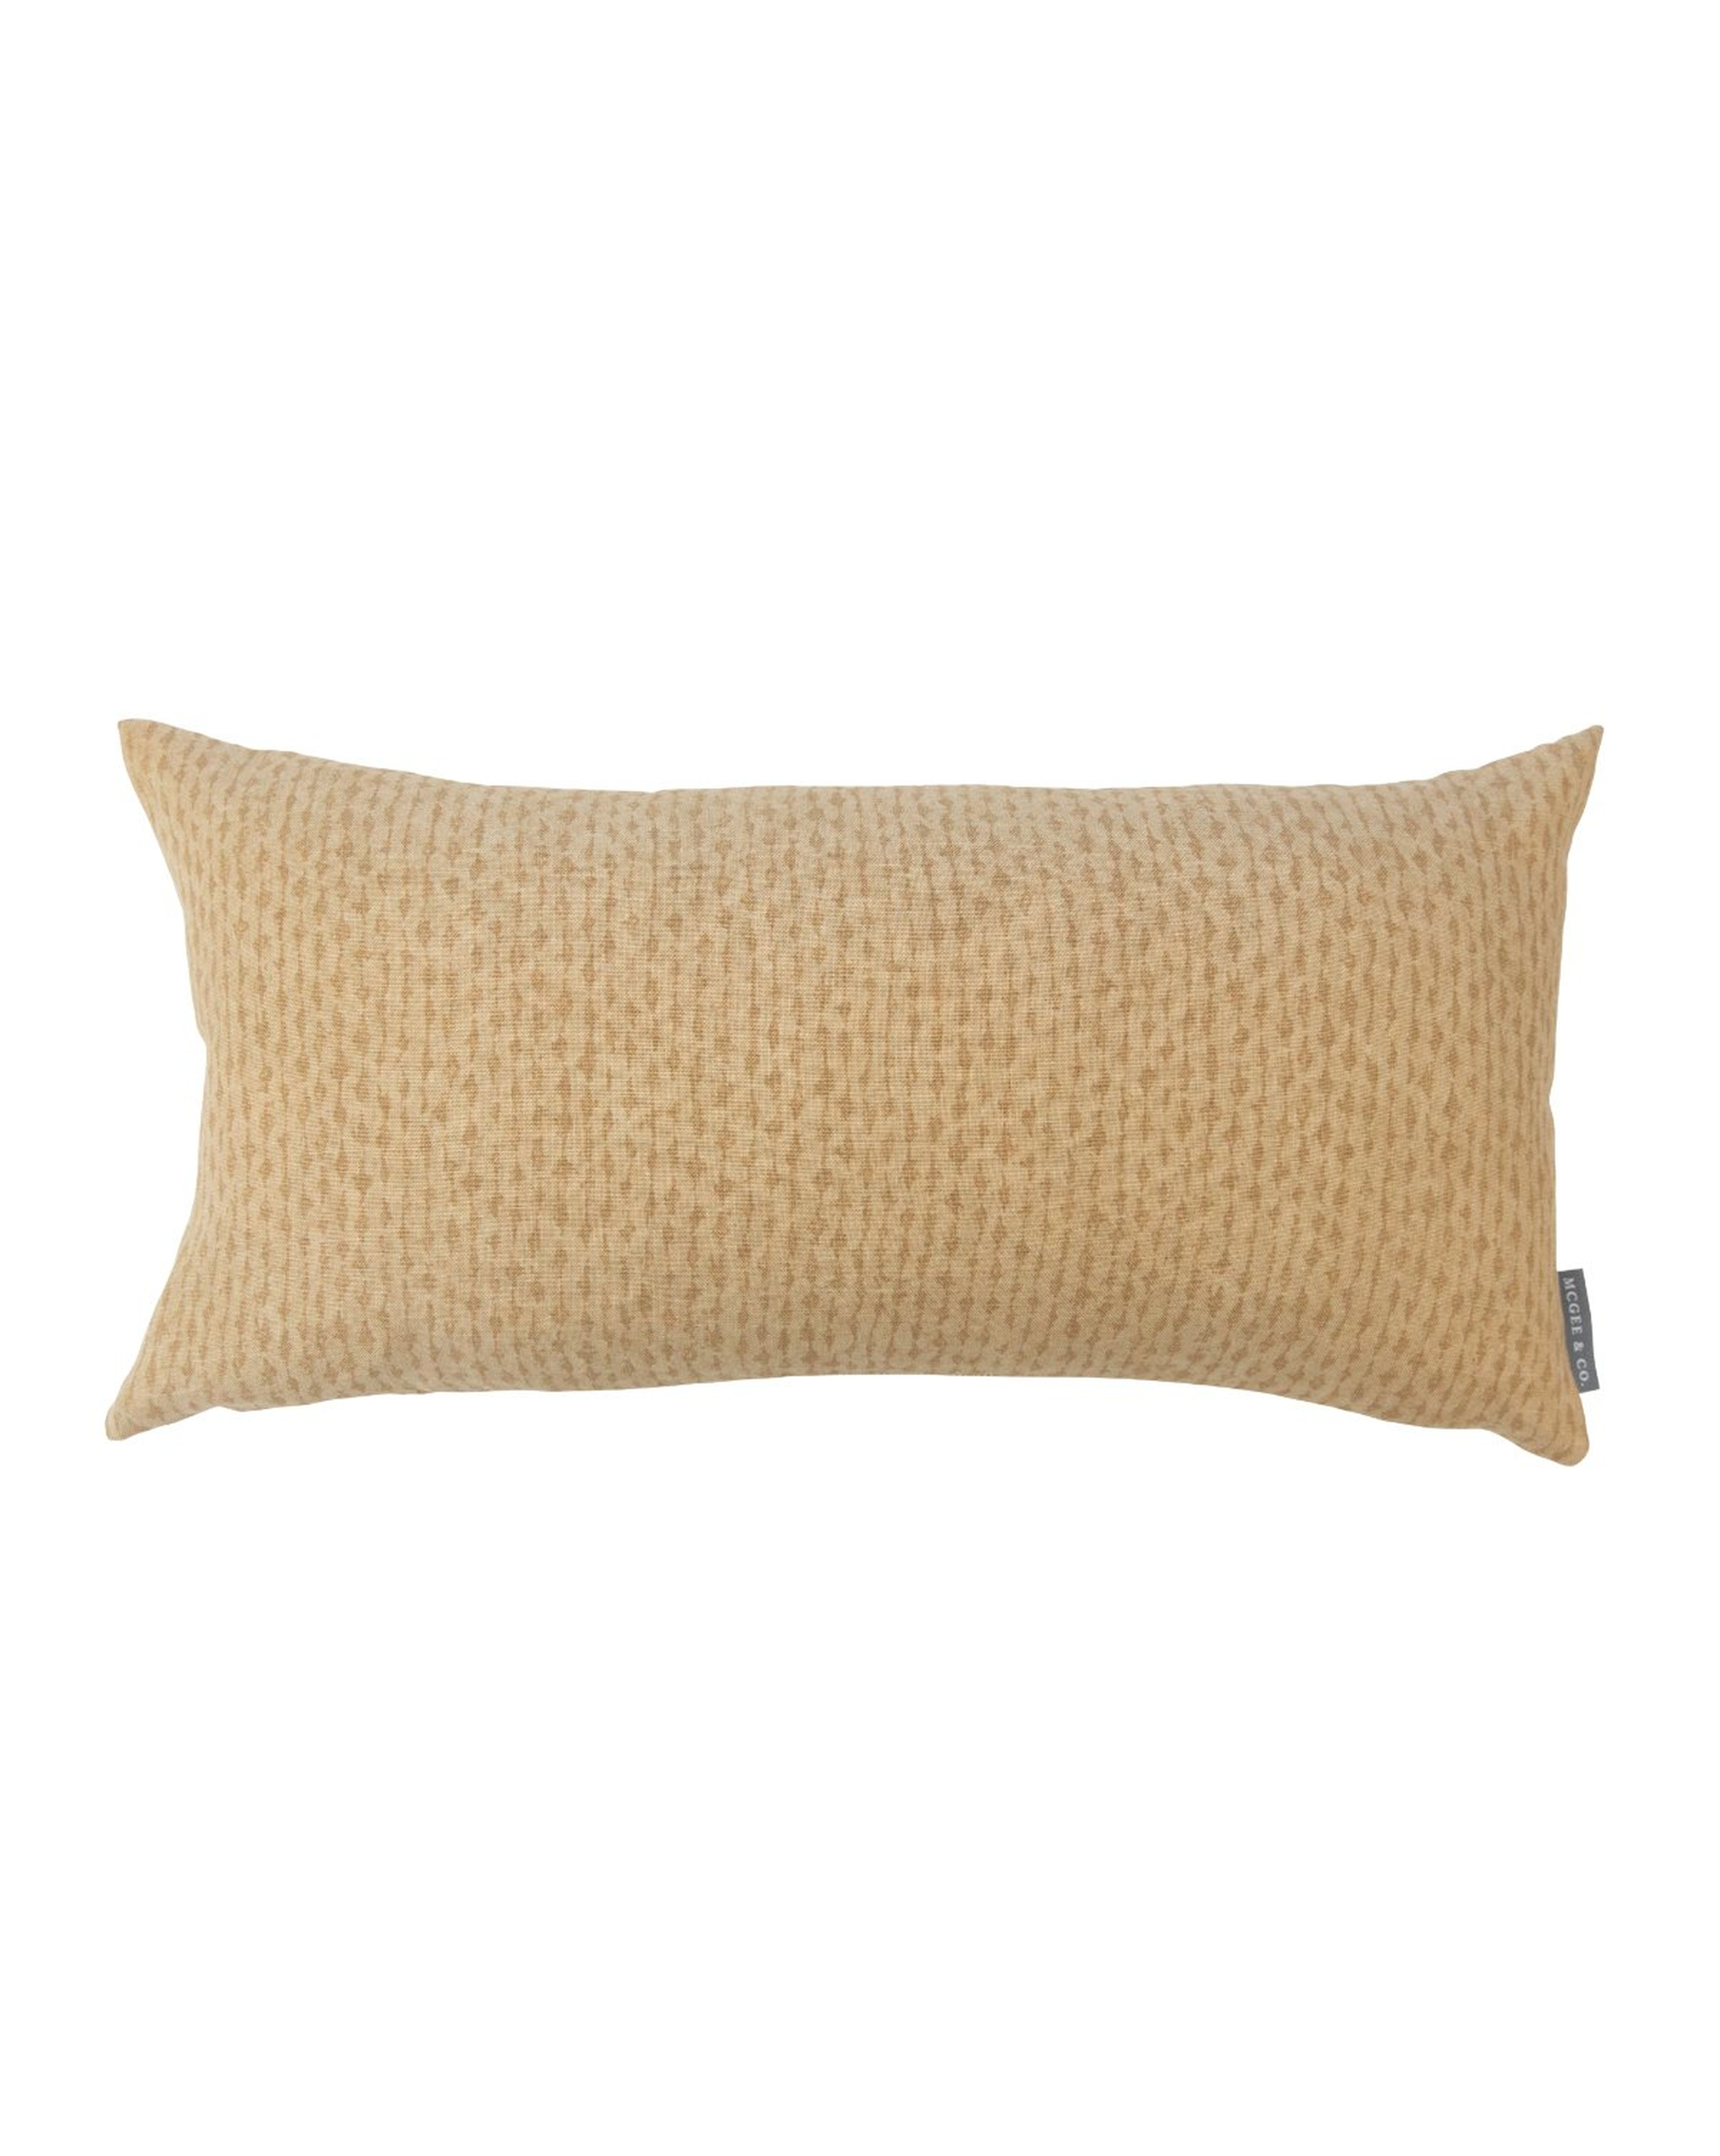 LOTTIE PILLOW WITHOUT INSERT, 12" x 24" - McGee & Co.